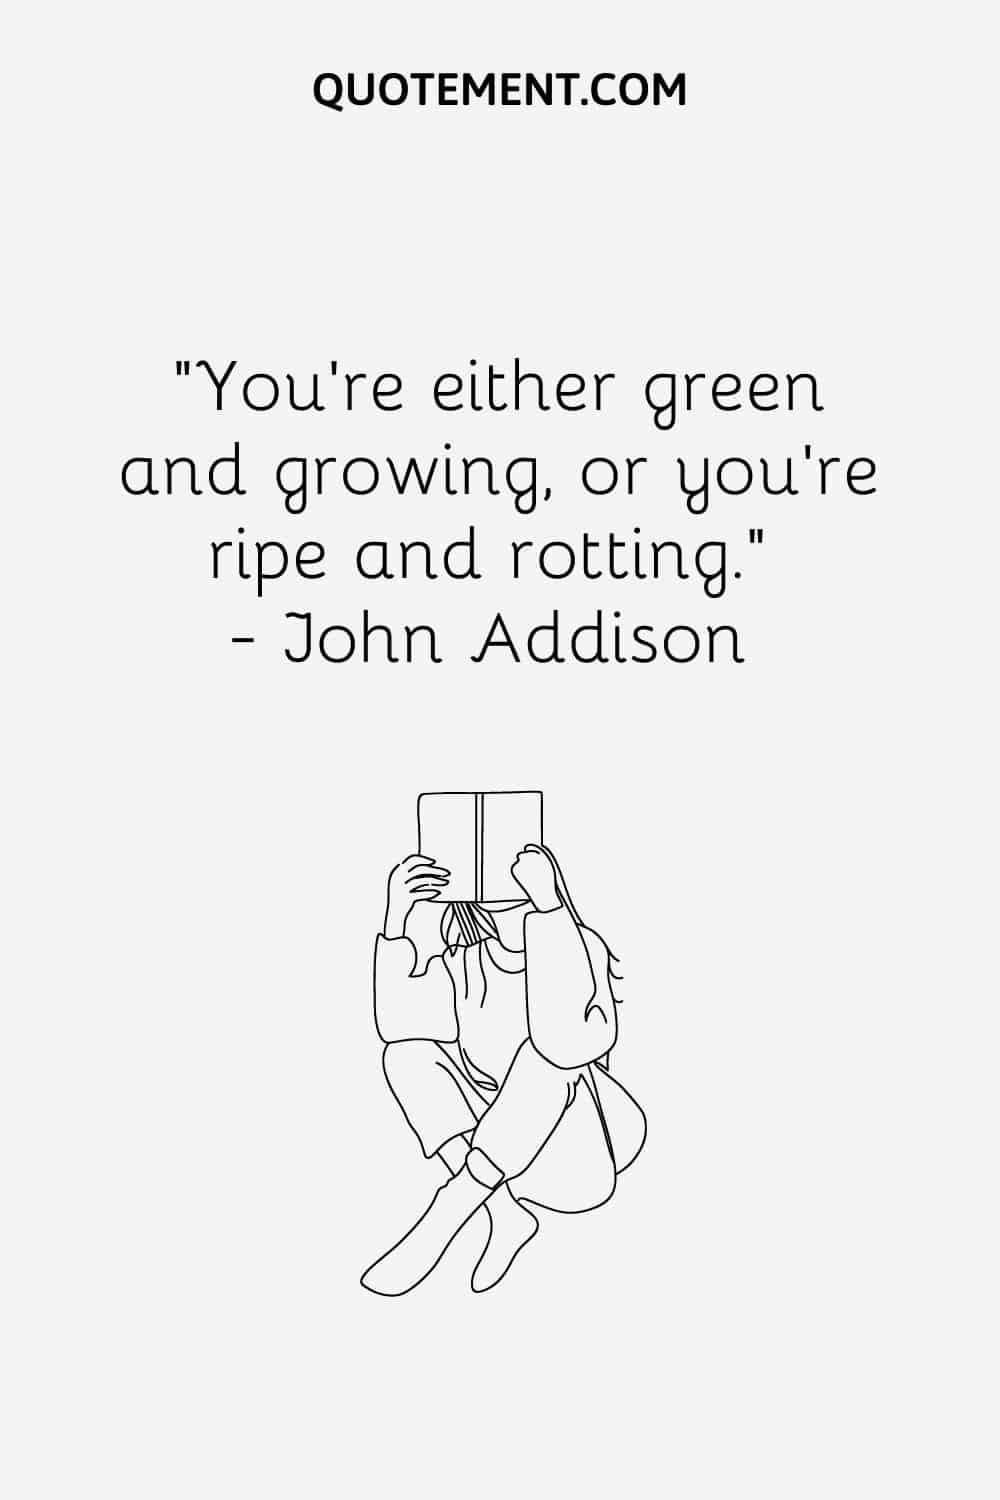 You’re either green and growing, or you’re ripe and rotting